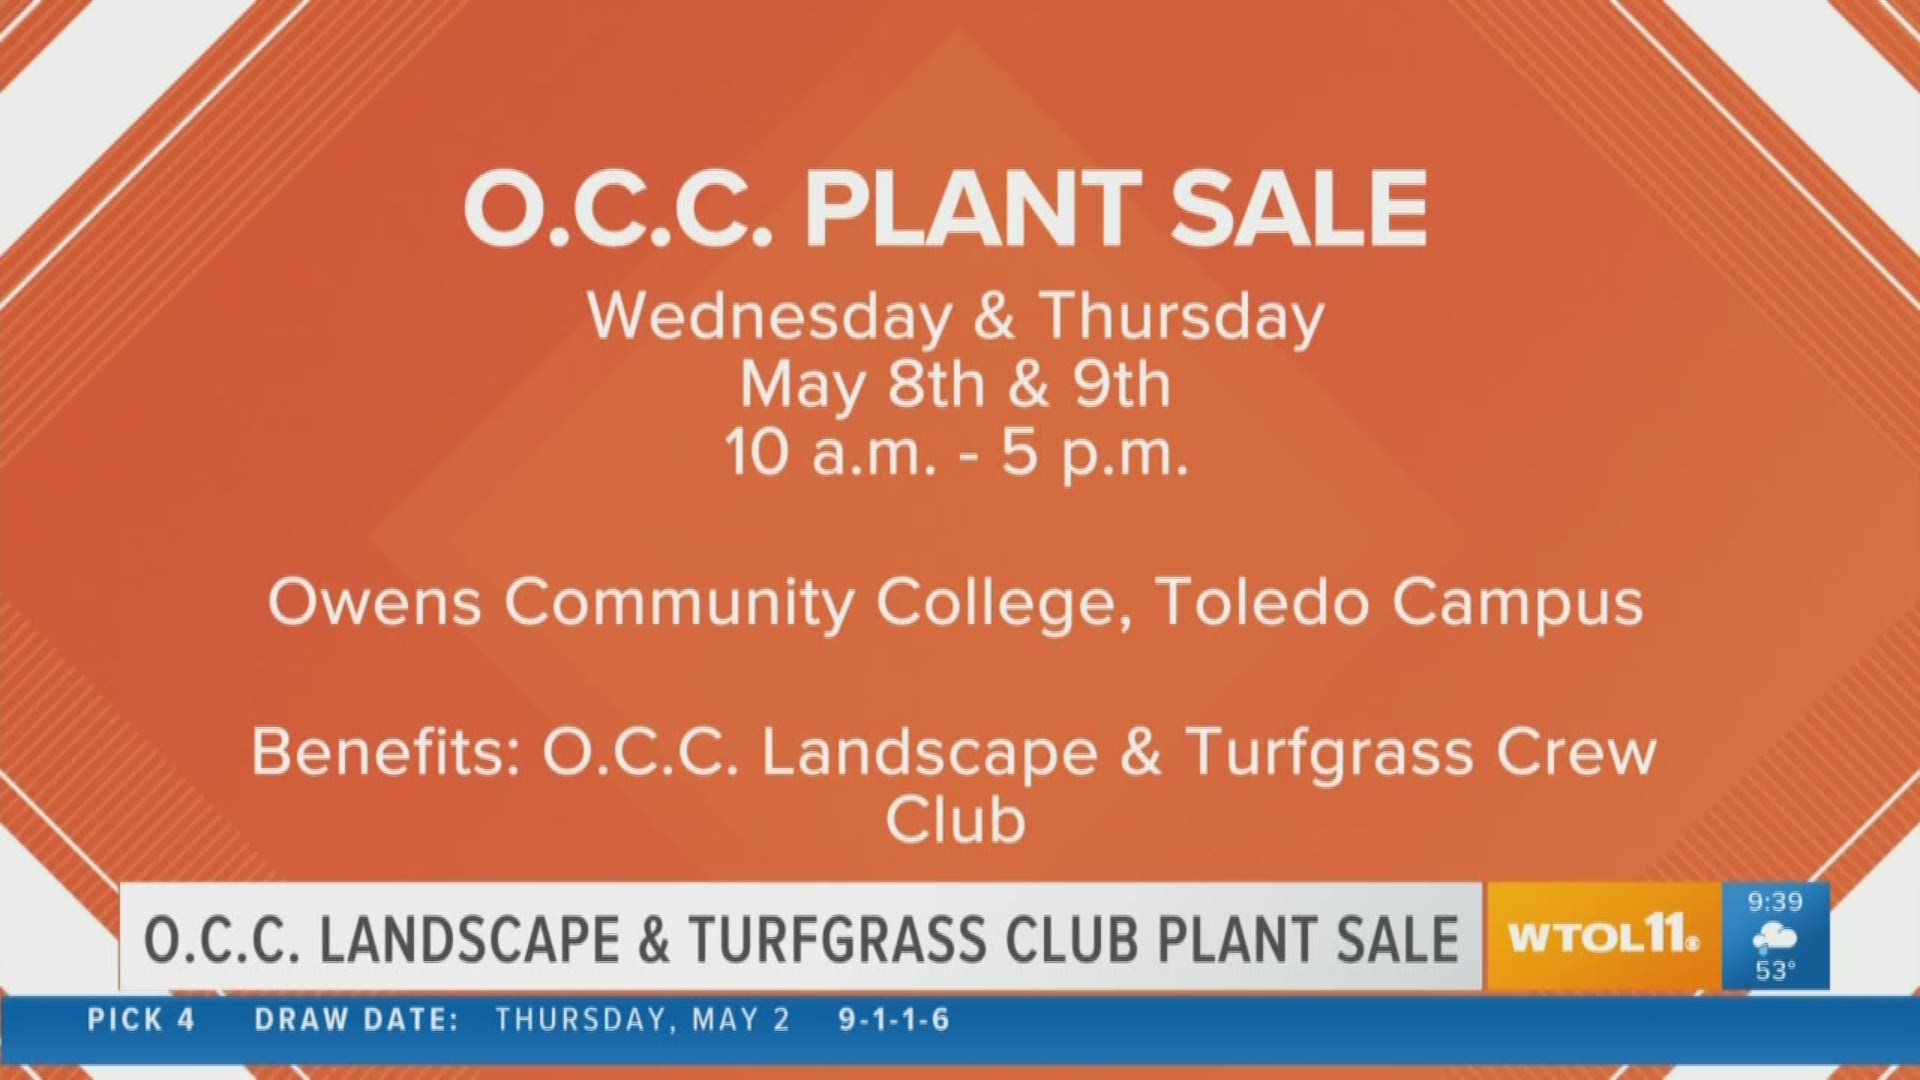 Start planning your spring planting now at the Owens Community College plant sale next week.